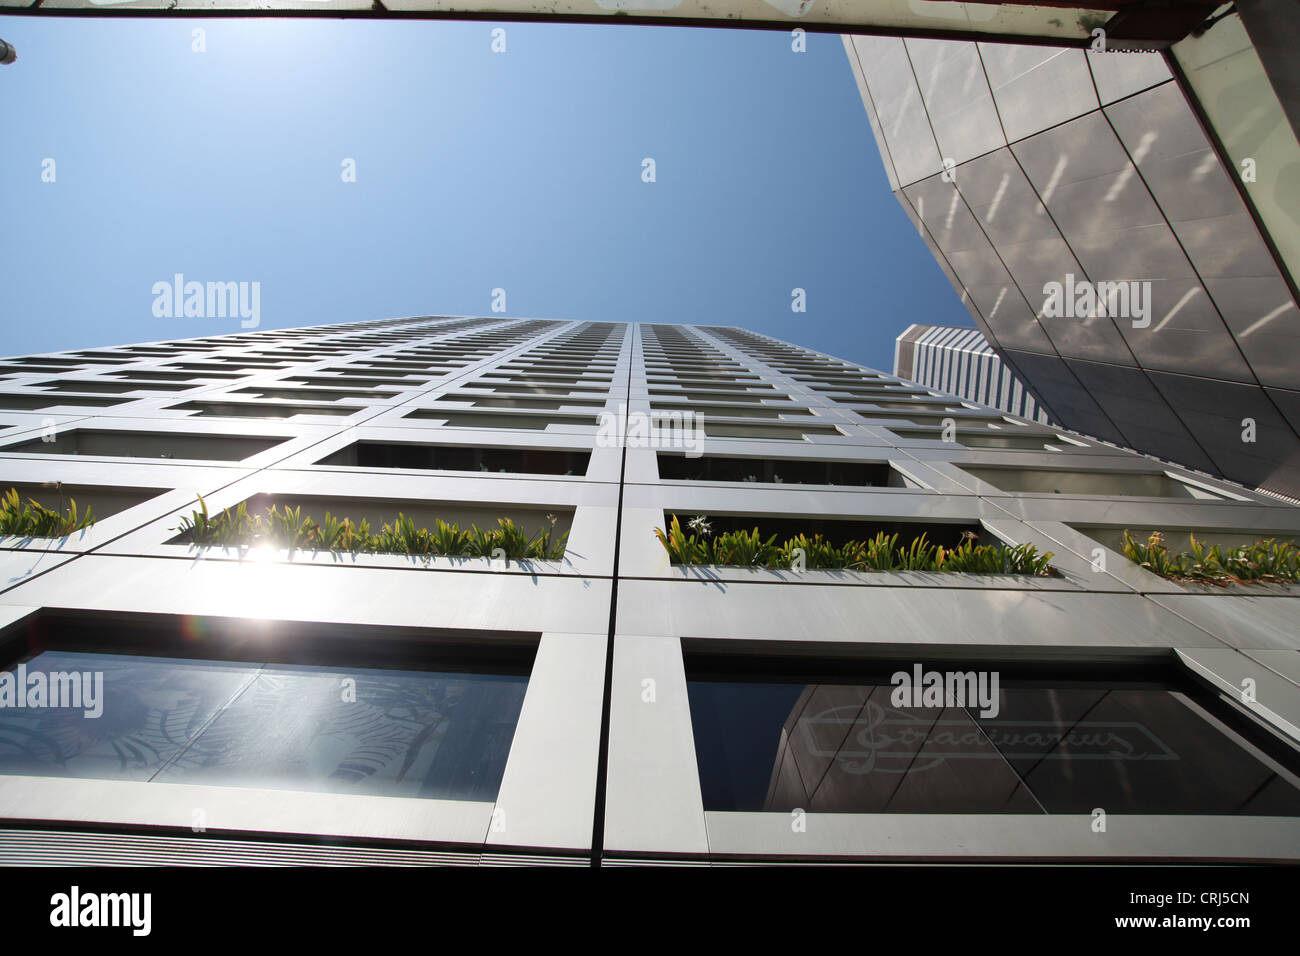 moden glass snd steel structure Stock Photo